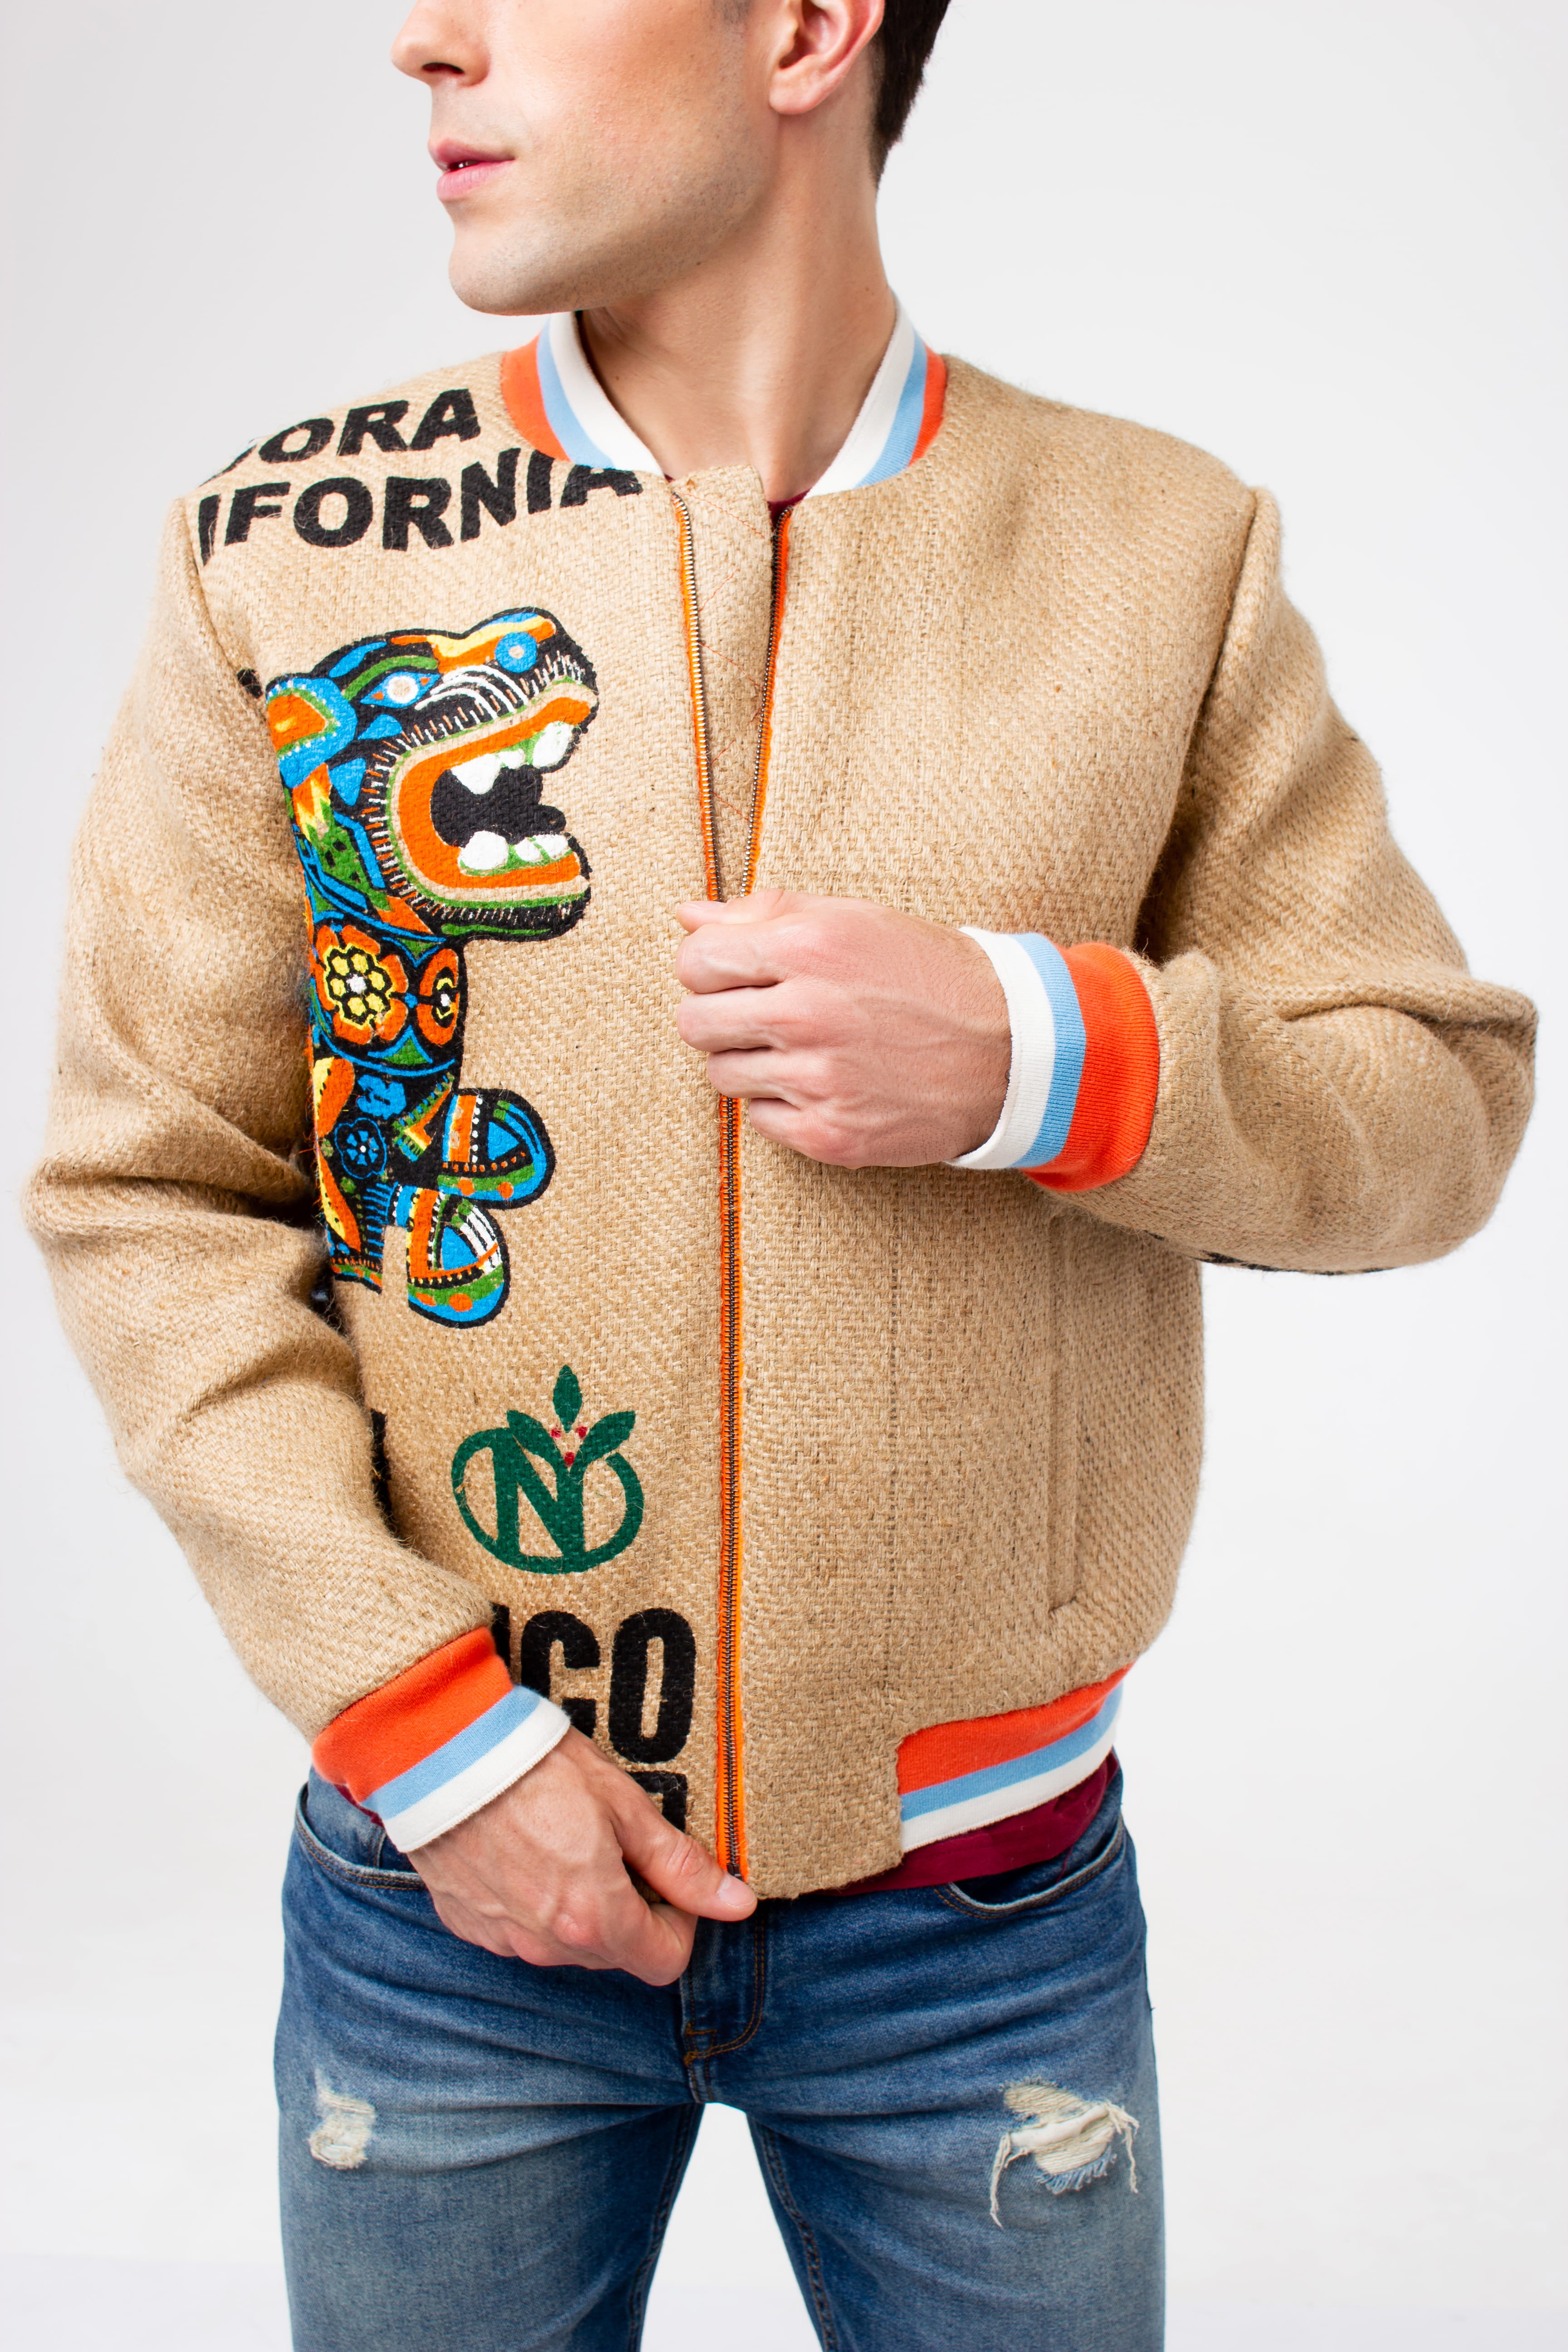 A young man pulling up an orange titanium zipper of his one-off eco jacket made of upcyceled coffee sacks